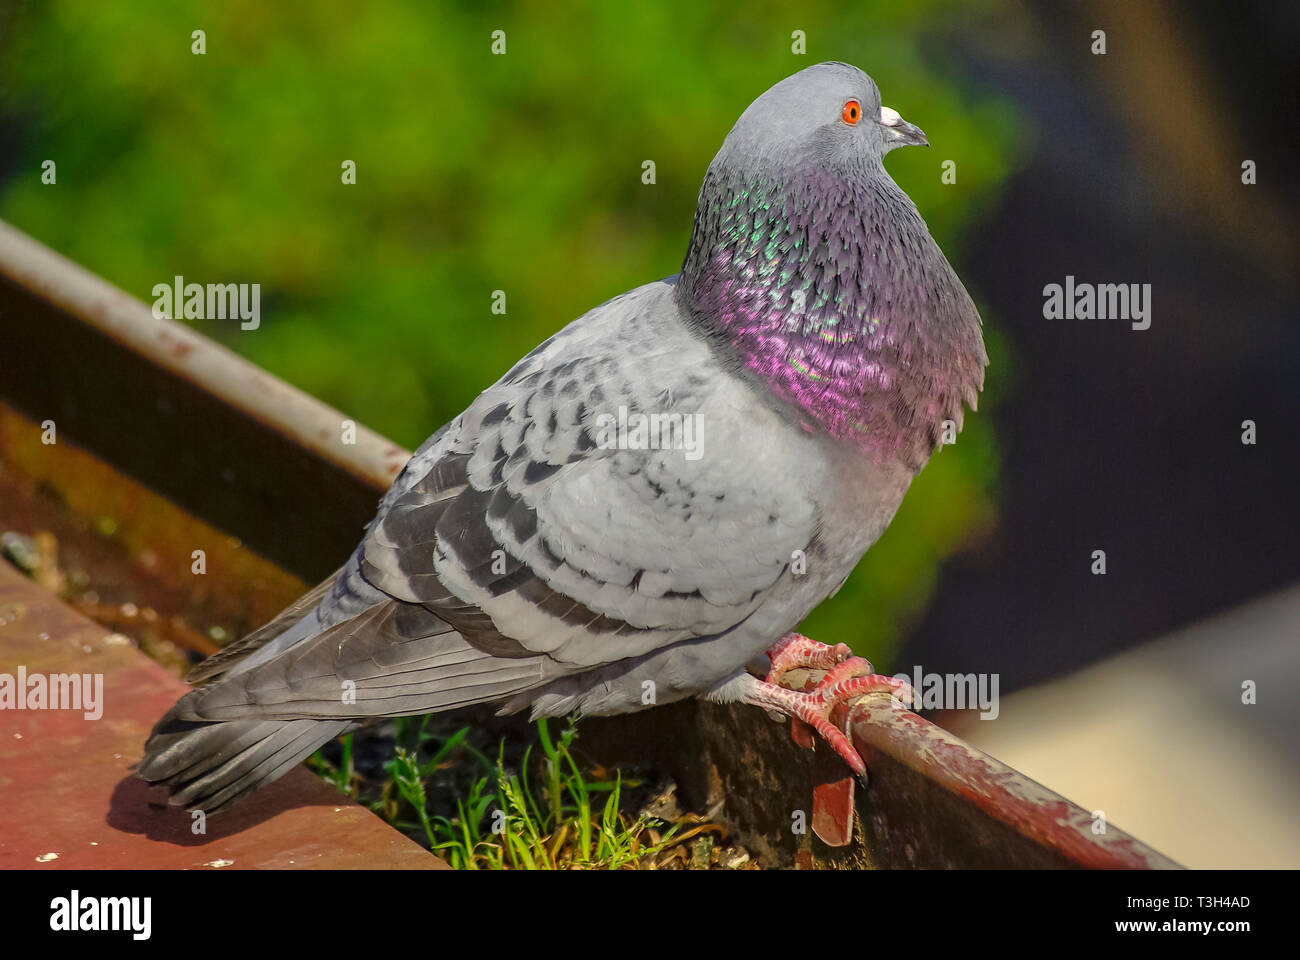 A pigeon in a rain gutter at the edge of a roof. Stock Photo